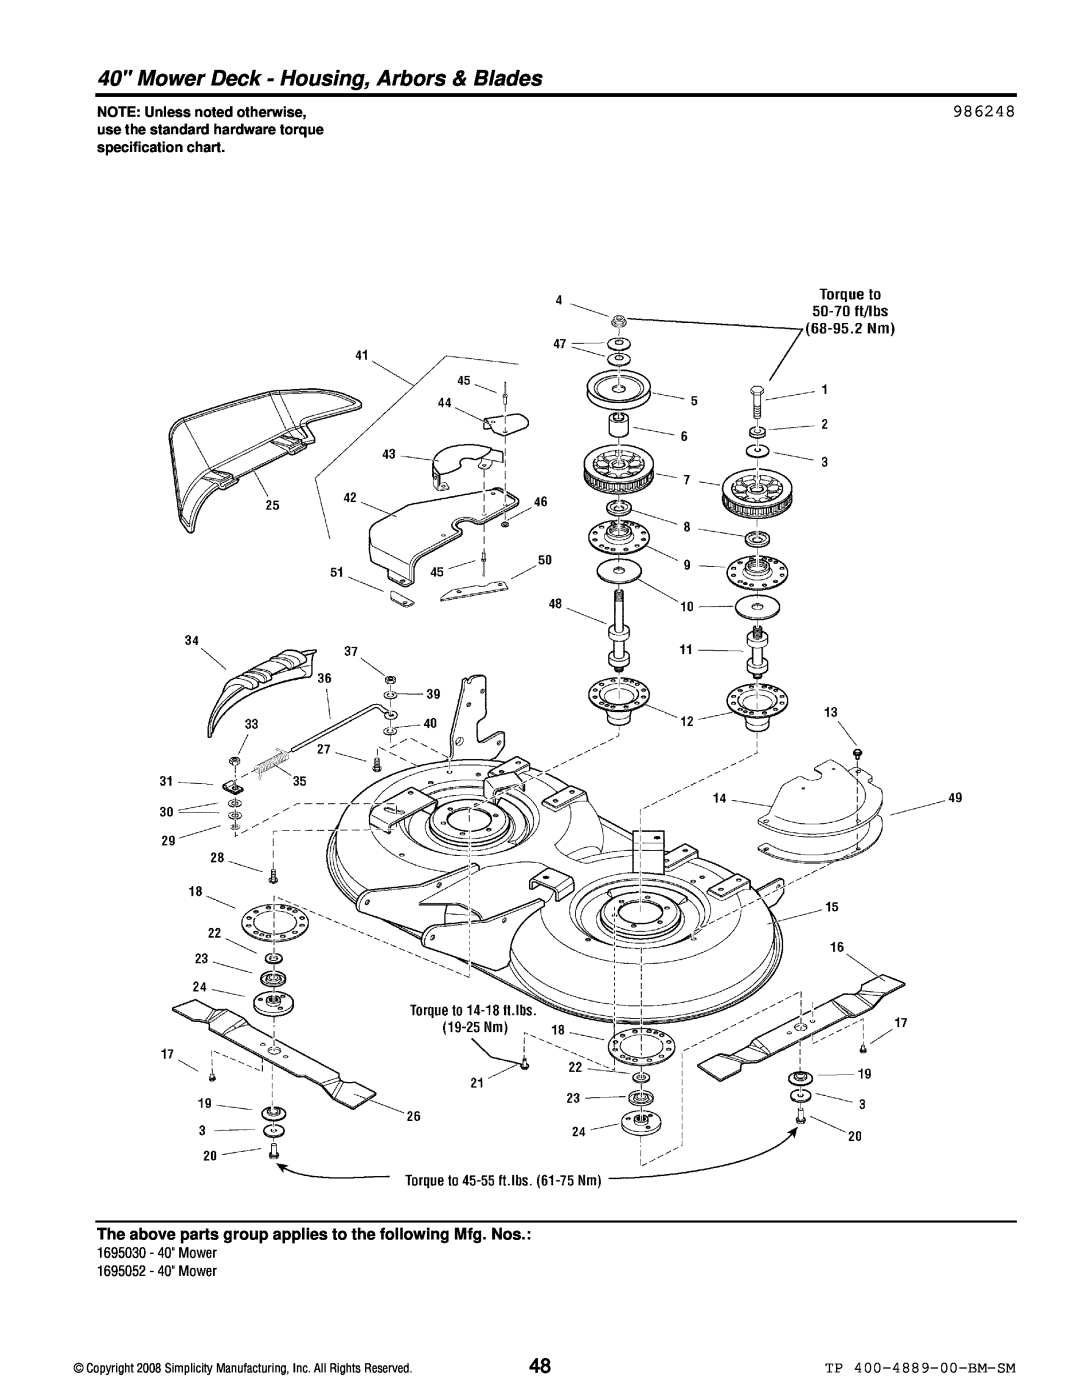 Simplicity 2600 Series Mower Deck - Housing, Arbors & Blades, 986248, TP 400-4889-00-BM-SM, NOTE: Unless noted otherwise 